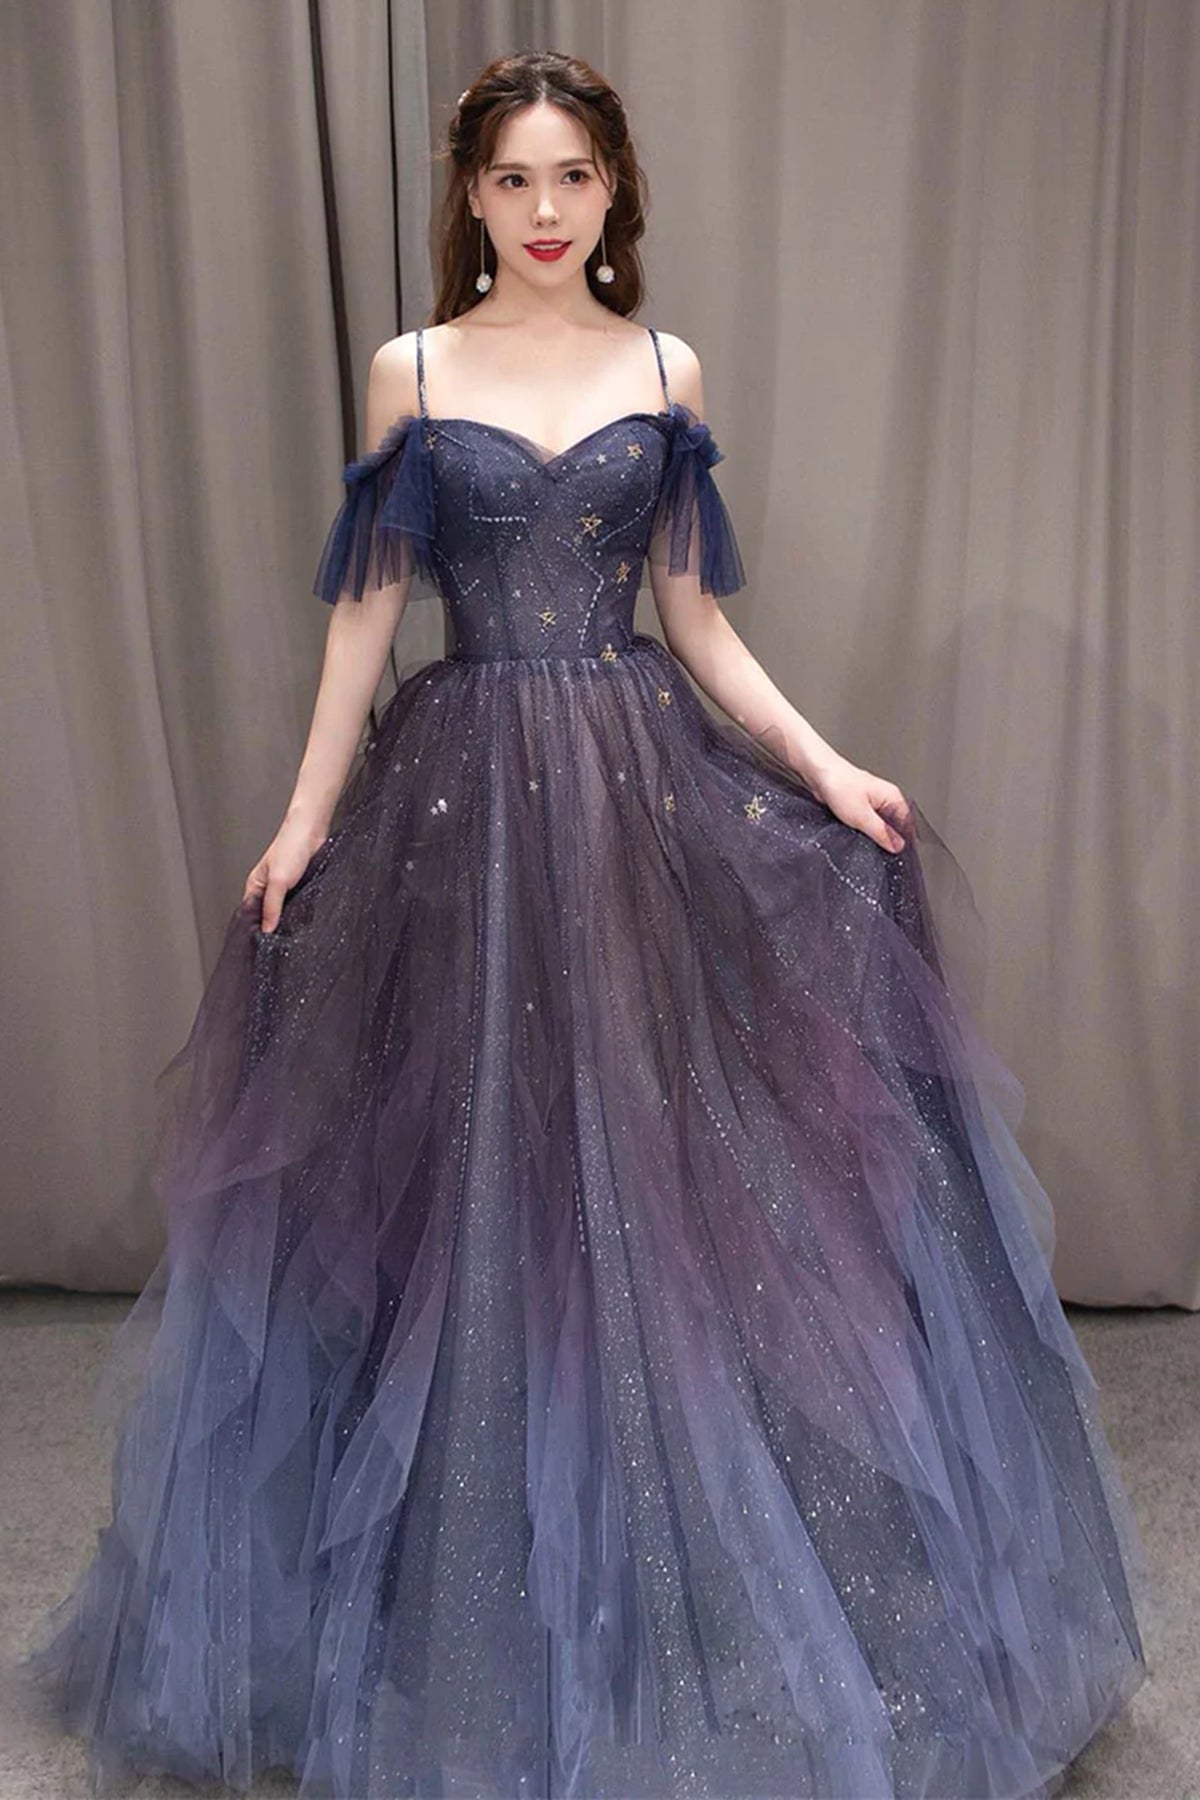 Off the Shoulder Purple Ombre Tulle Long Prom Dresses, Off Shoulder Purple Ombre Tulle Long Formal Evening Dresses